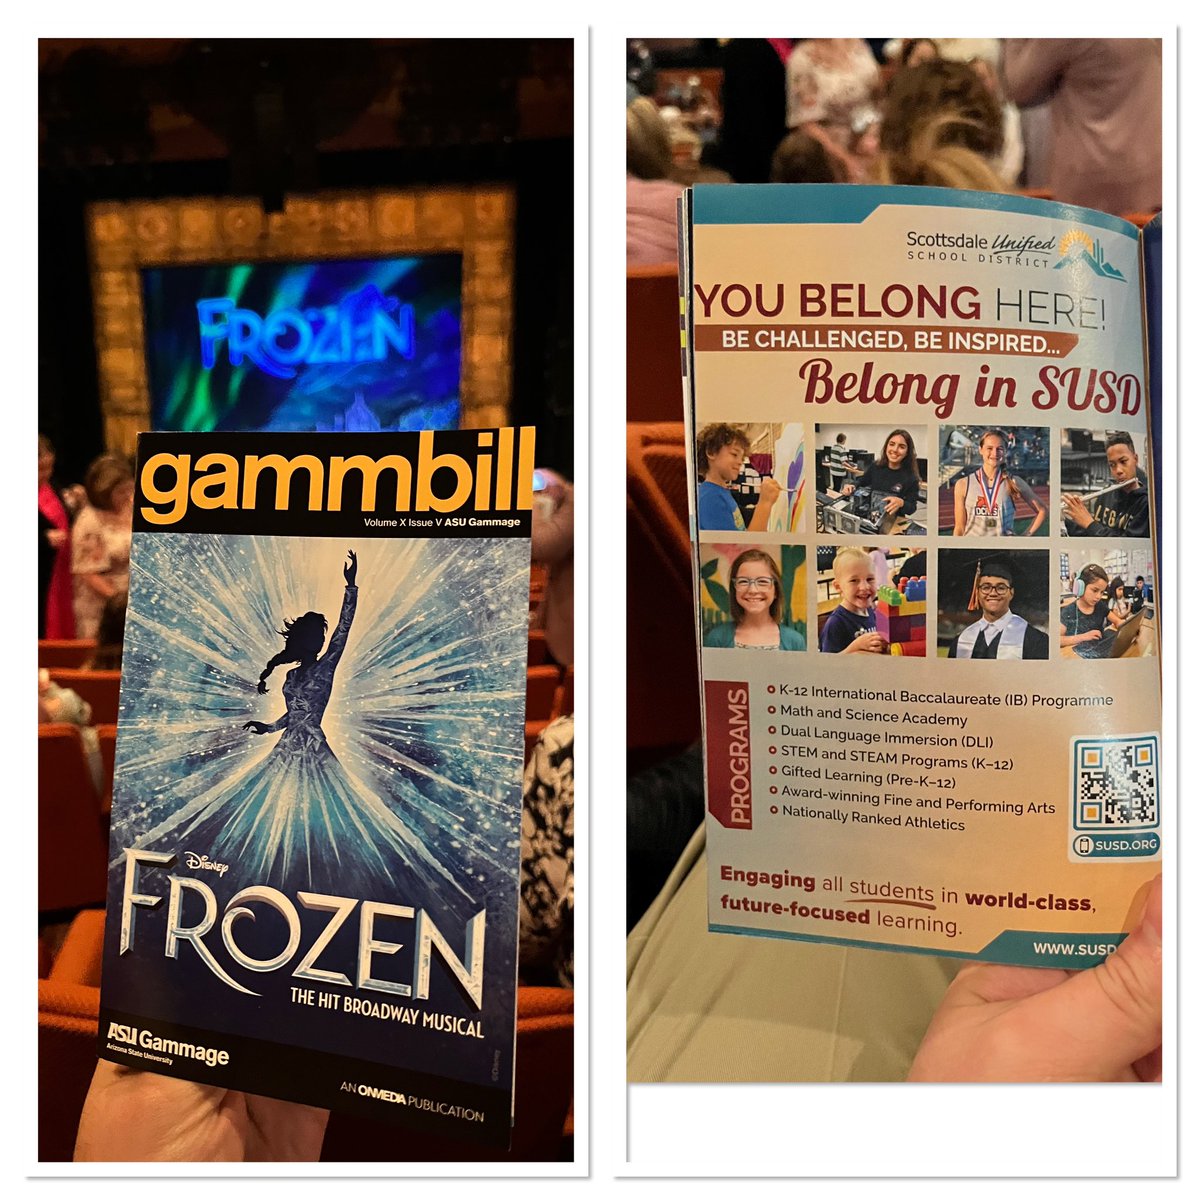 Seeing Frozen:The Musical and reading the playbill and there’s @ScottsdaleUSD ! Very cool! #youbelonghere #bechallenged #beinspired